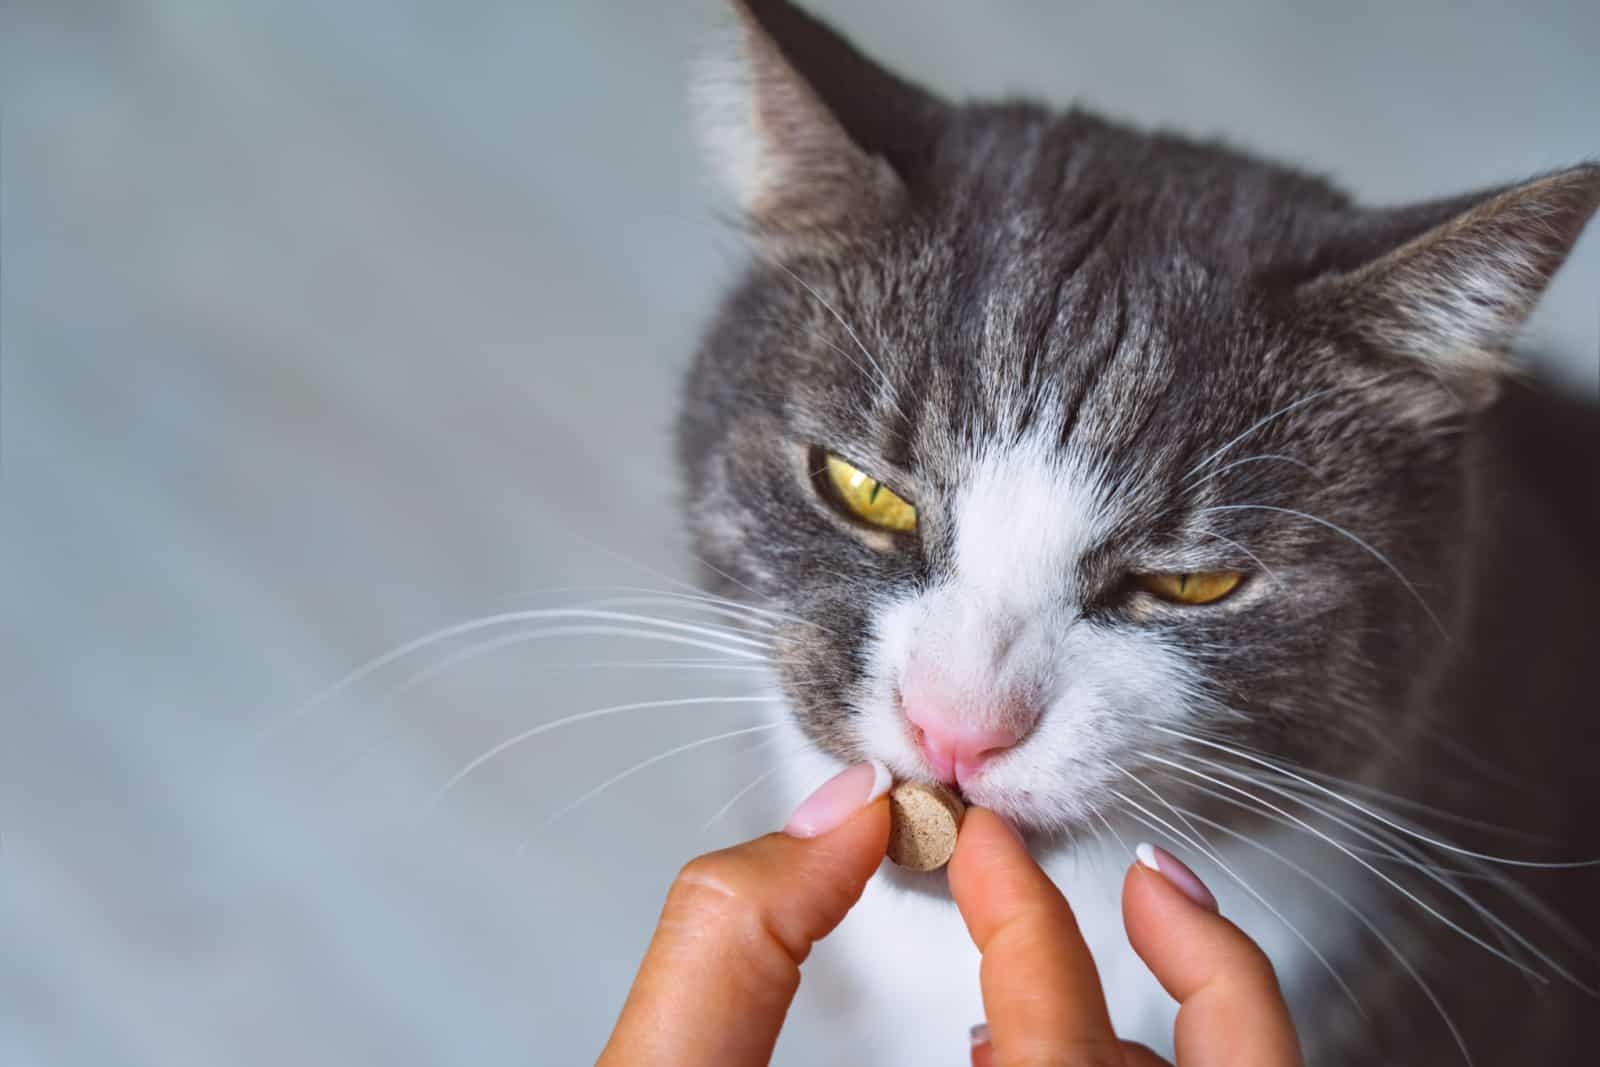 owner giving pill to cat